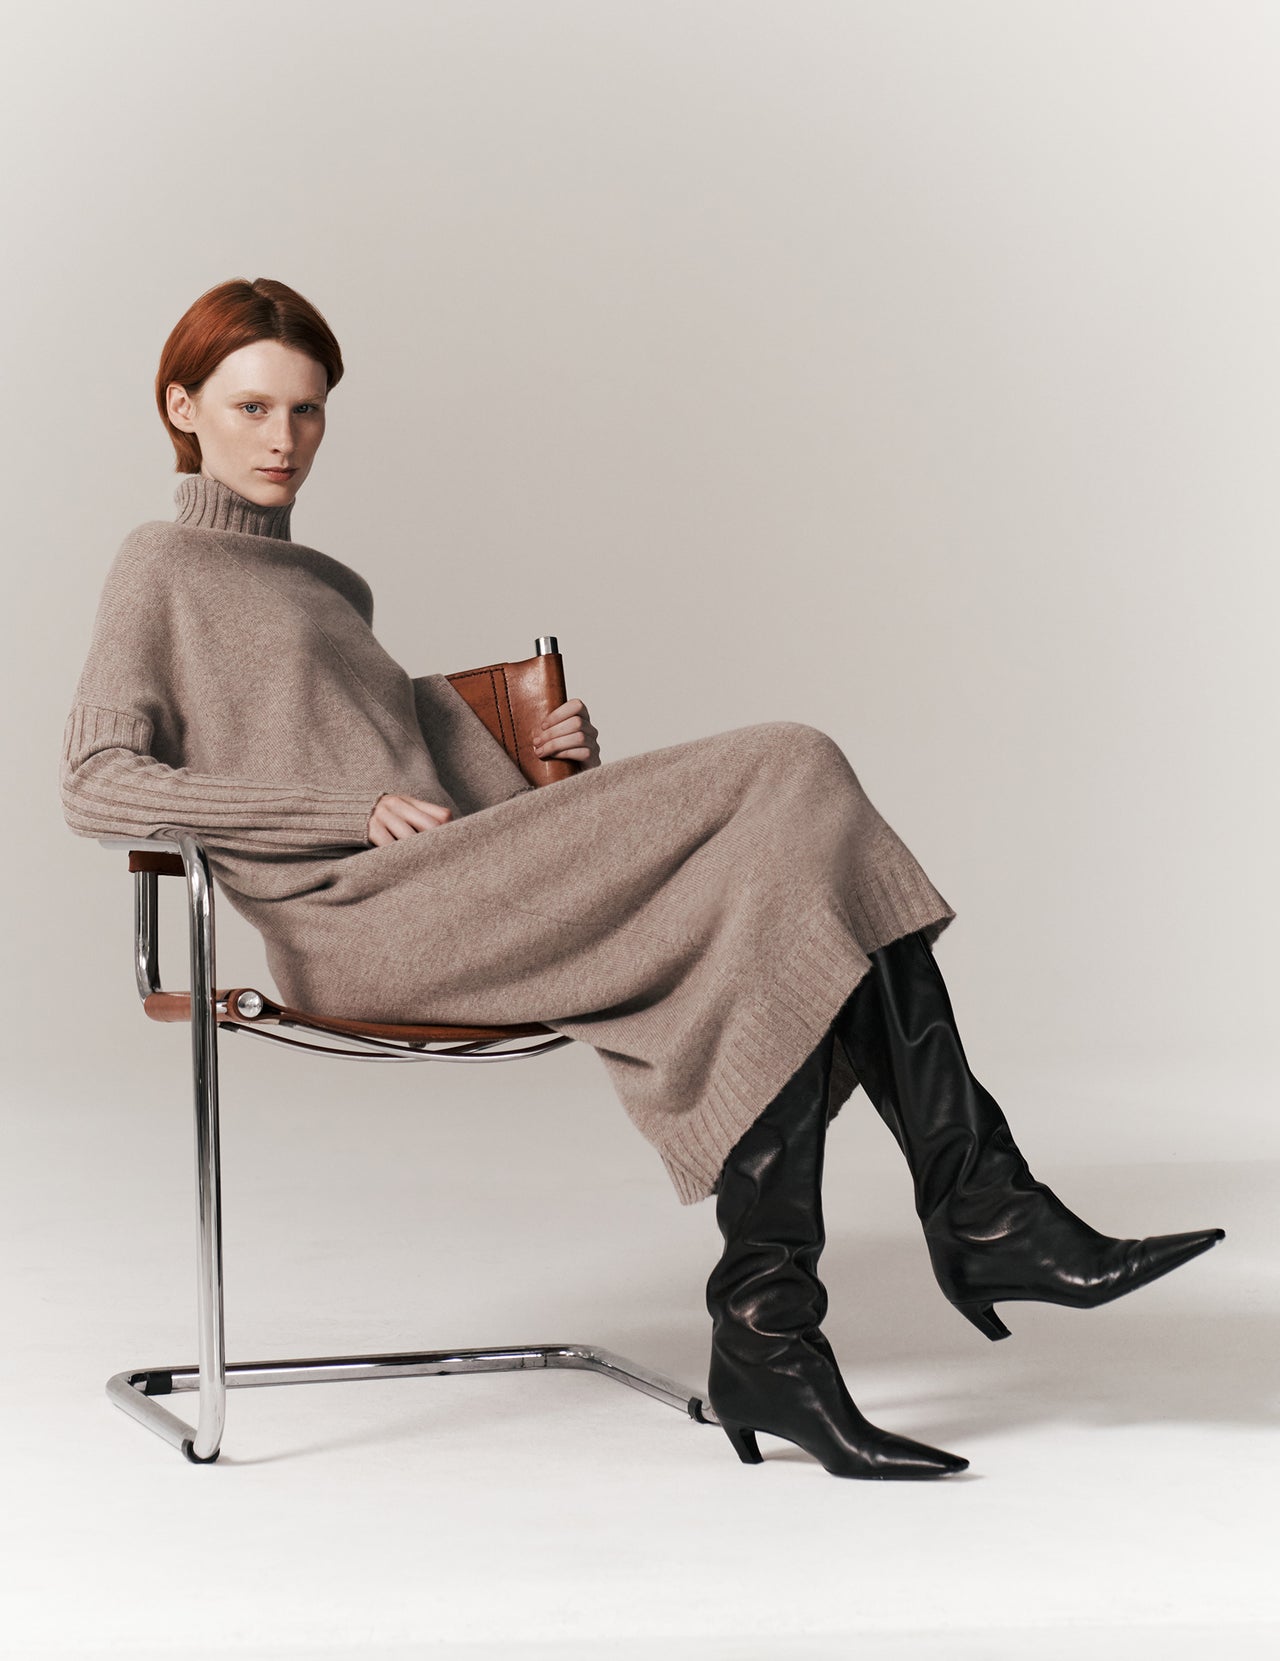  Roll Neck Pleated Cashmere Dress 